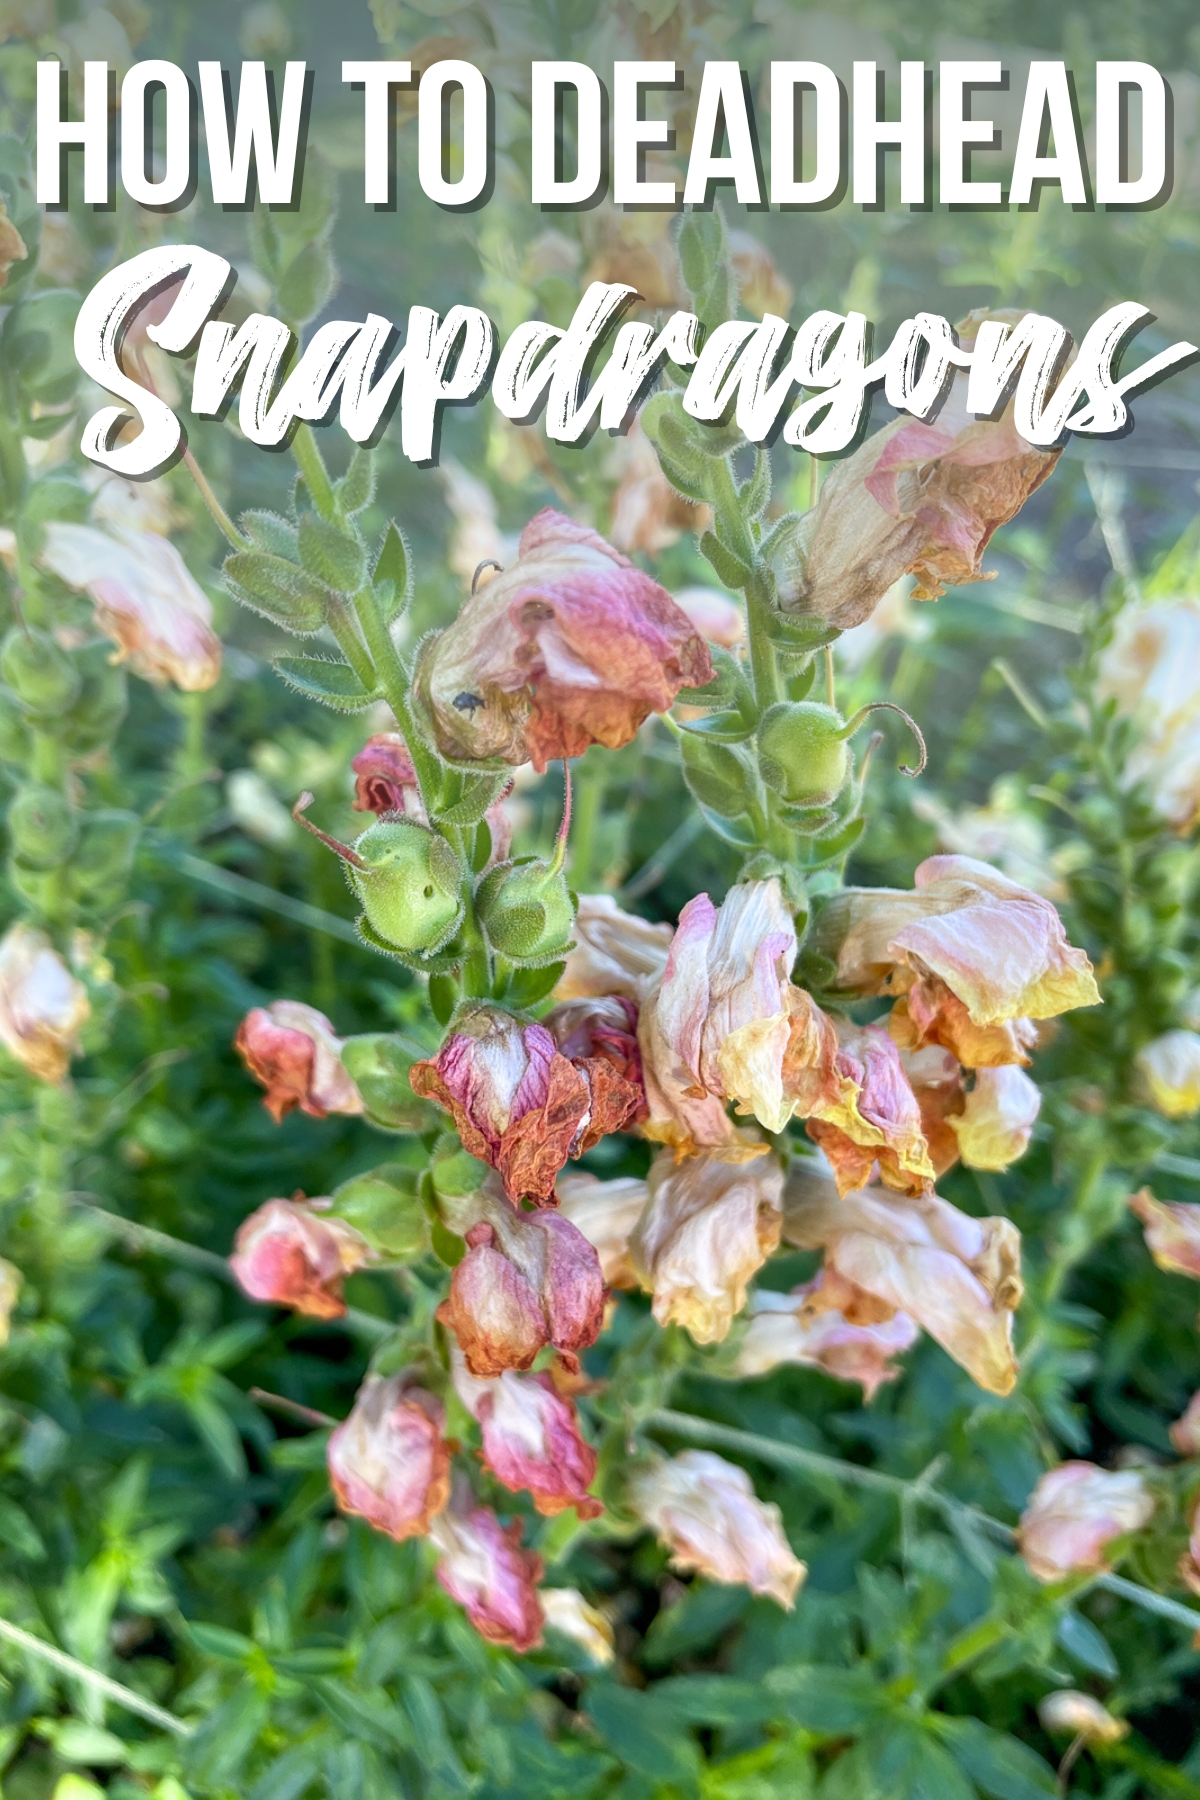 snapdragon flower after blooming with text overlay "how to deadhead snapdragons"